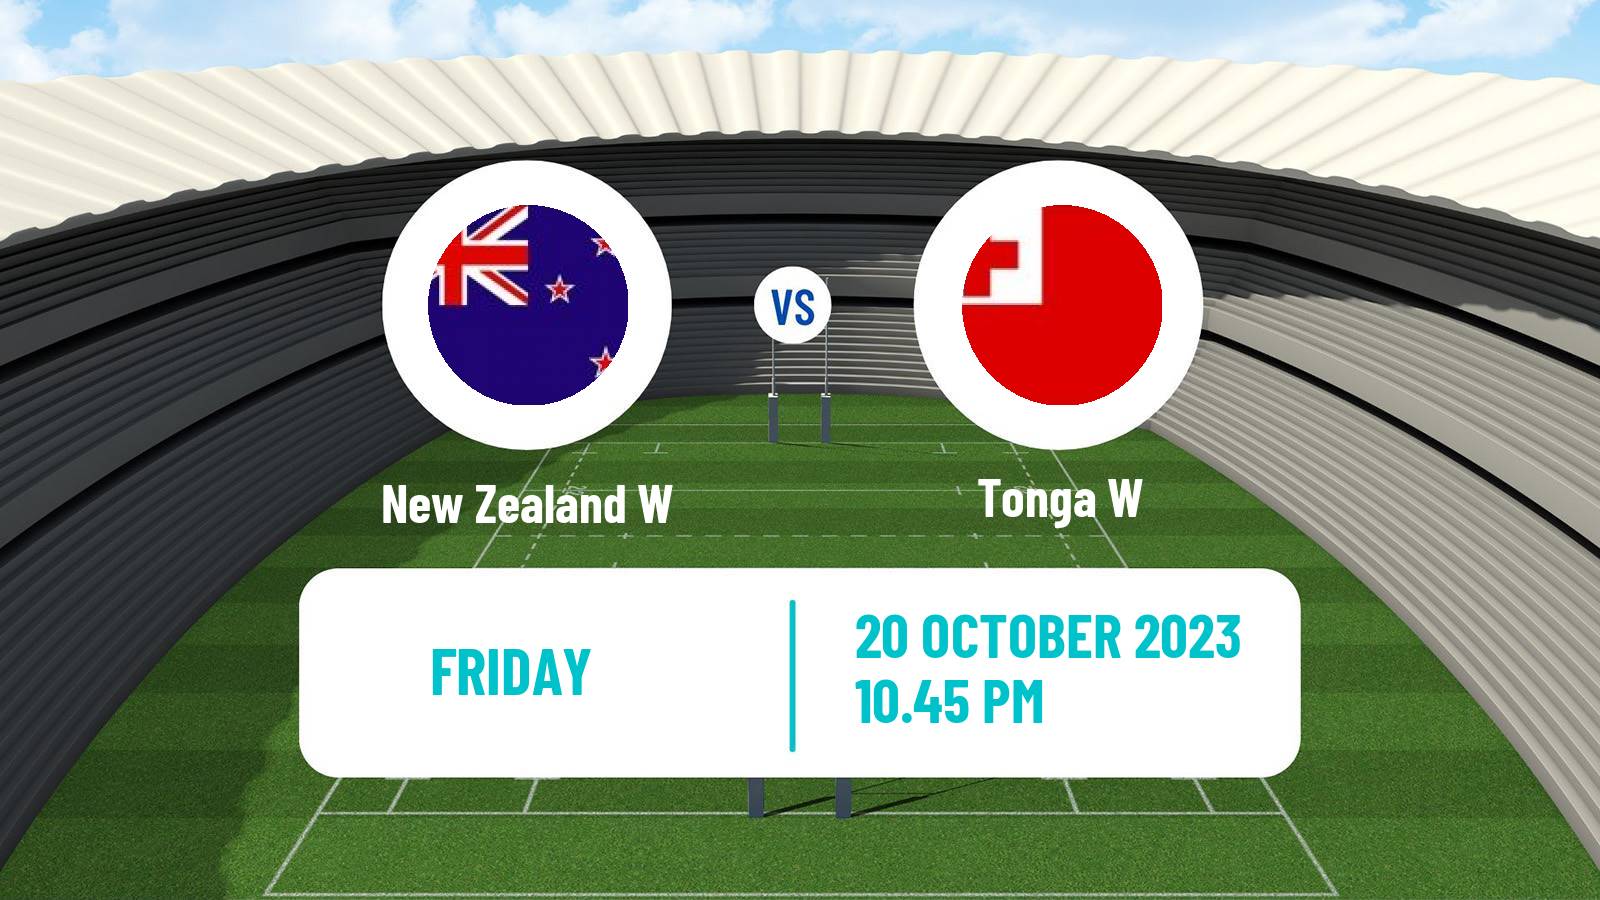 Rugby league Pacific Championships Rugby League Women New Zealand W - Tonga W